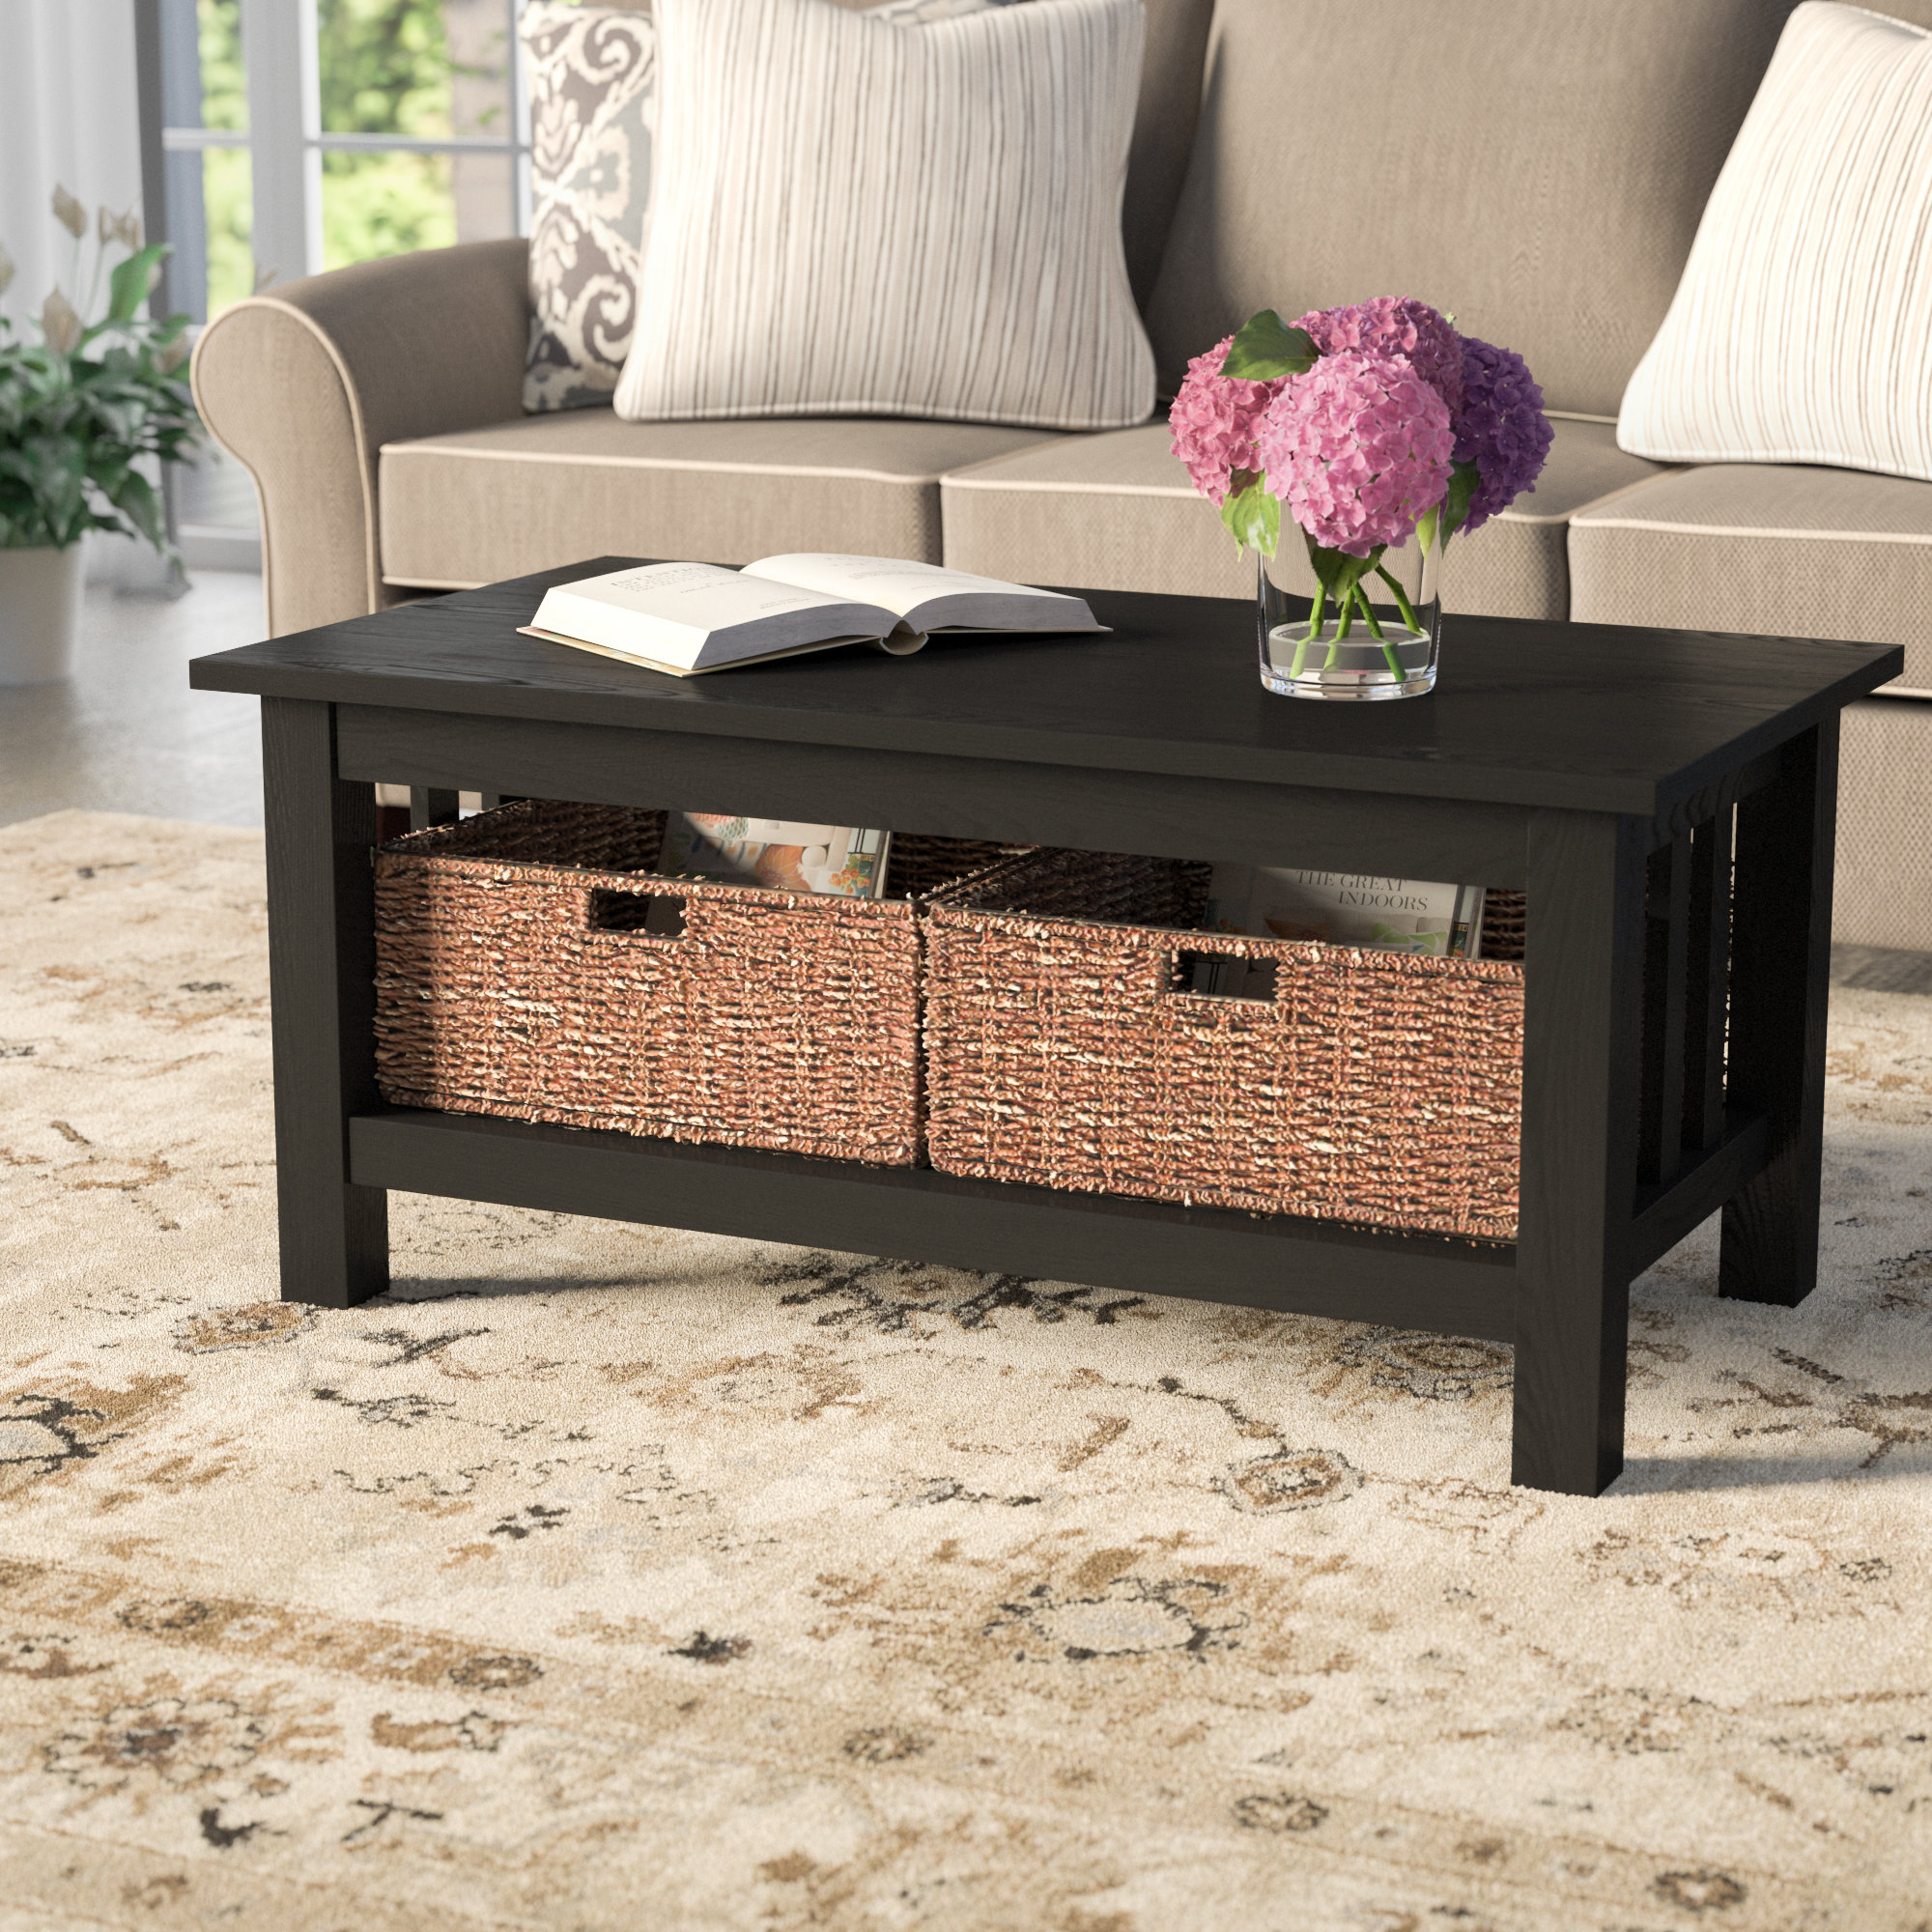 Andover Mills Denning Storage Coffee Table Reviews Wayfair within sizing 2000 X 2000